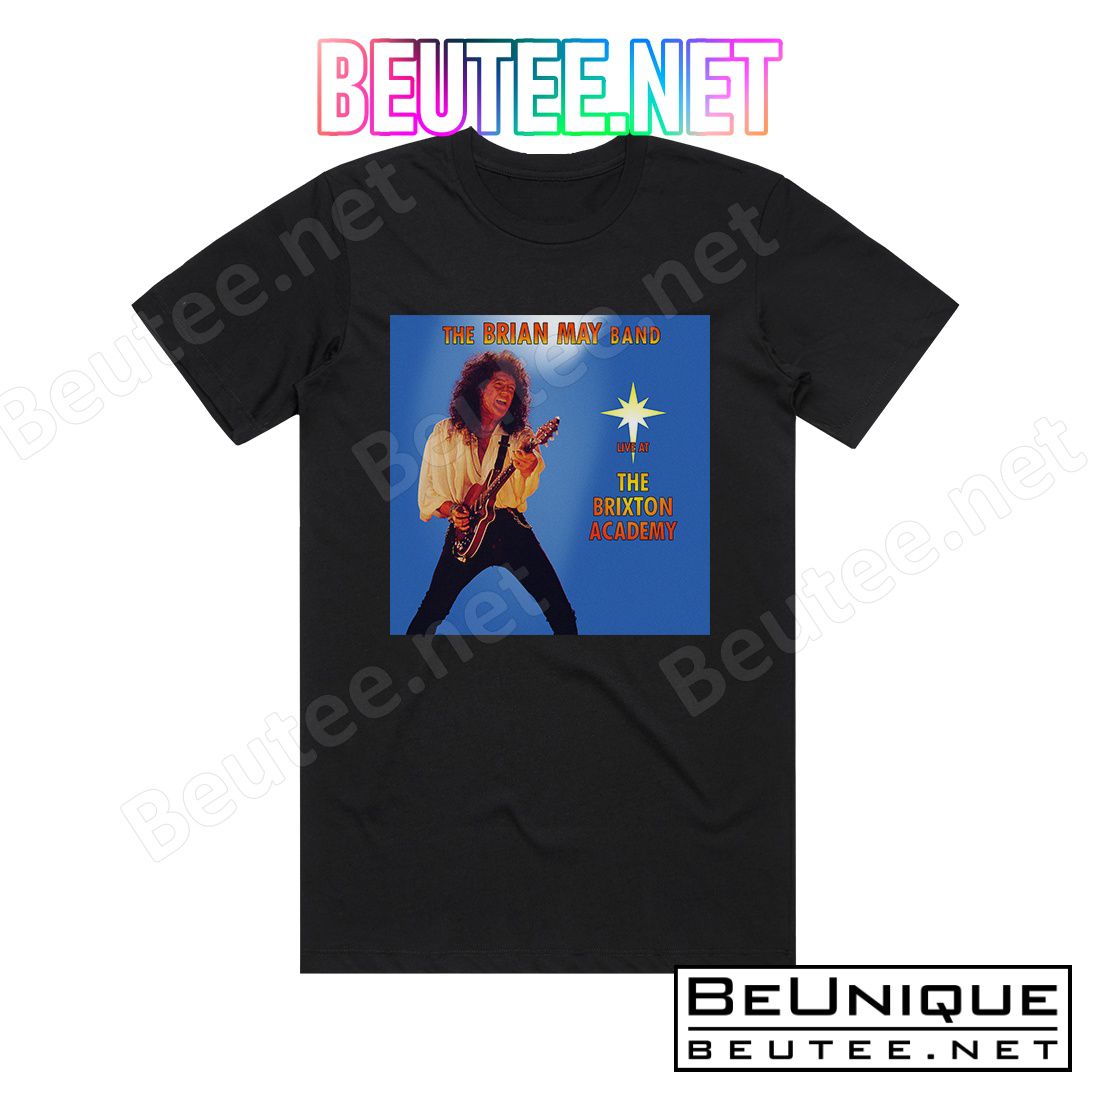 Brian May Live At The Brixton Academy Album Cover T-Shirt